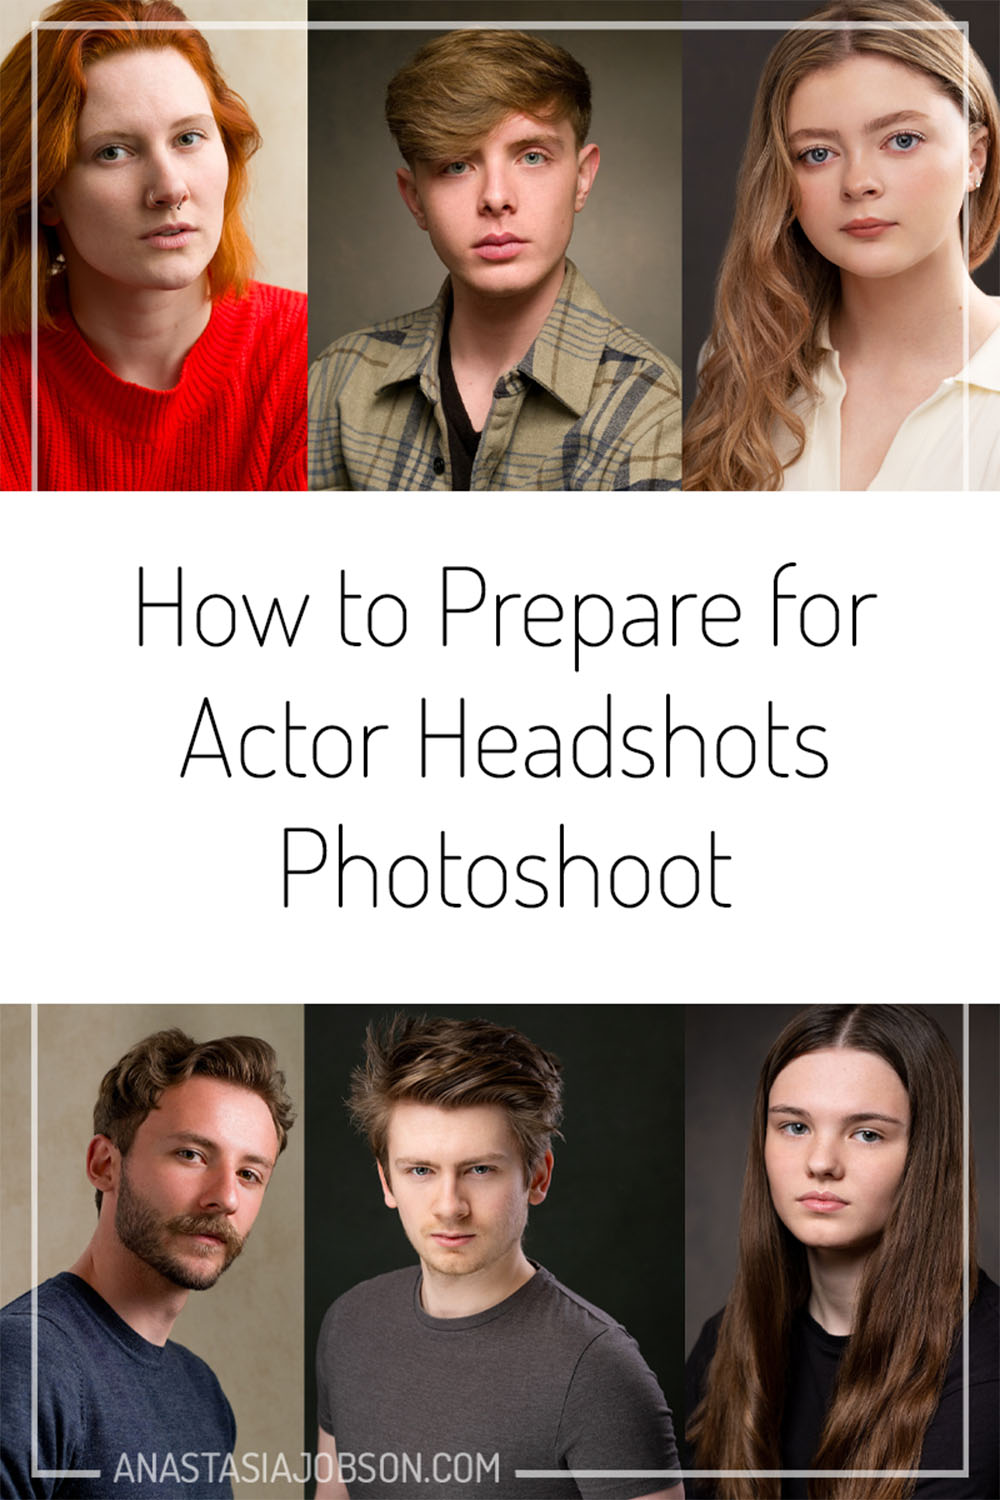 Actor headshots collage, text saying How to prepare for actors headshots